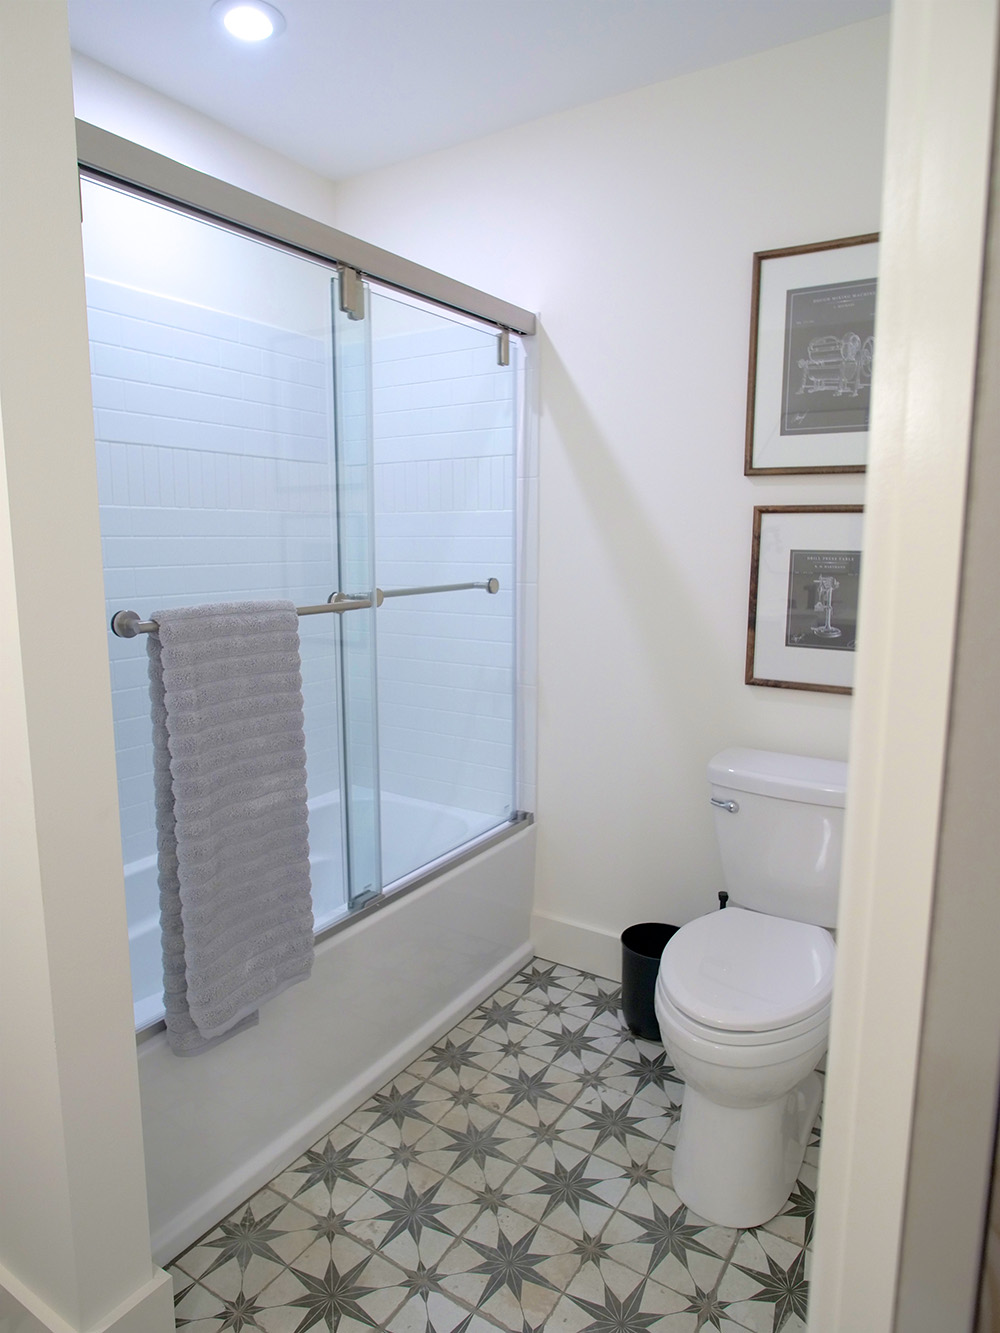 A bathroom with a shower and glass door, grey towel, white toilet, framed wall art and grey and white tile flooring